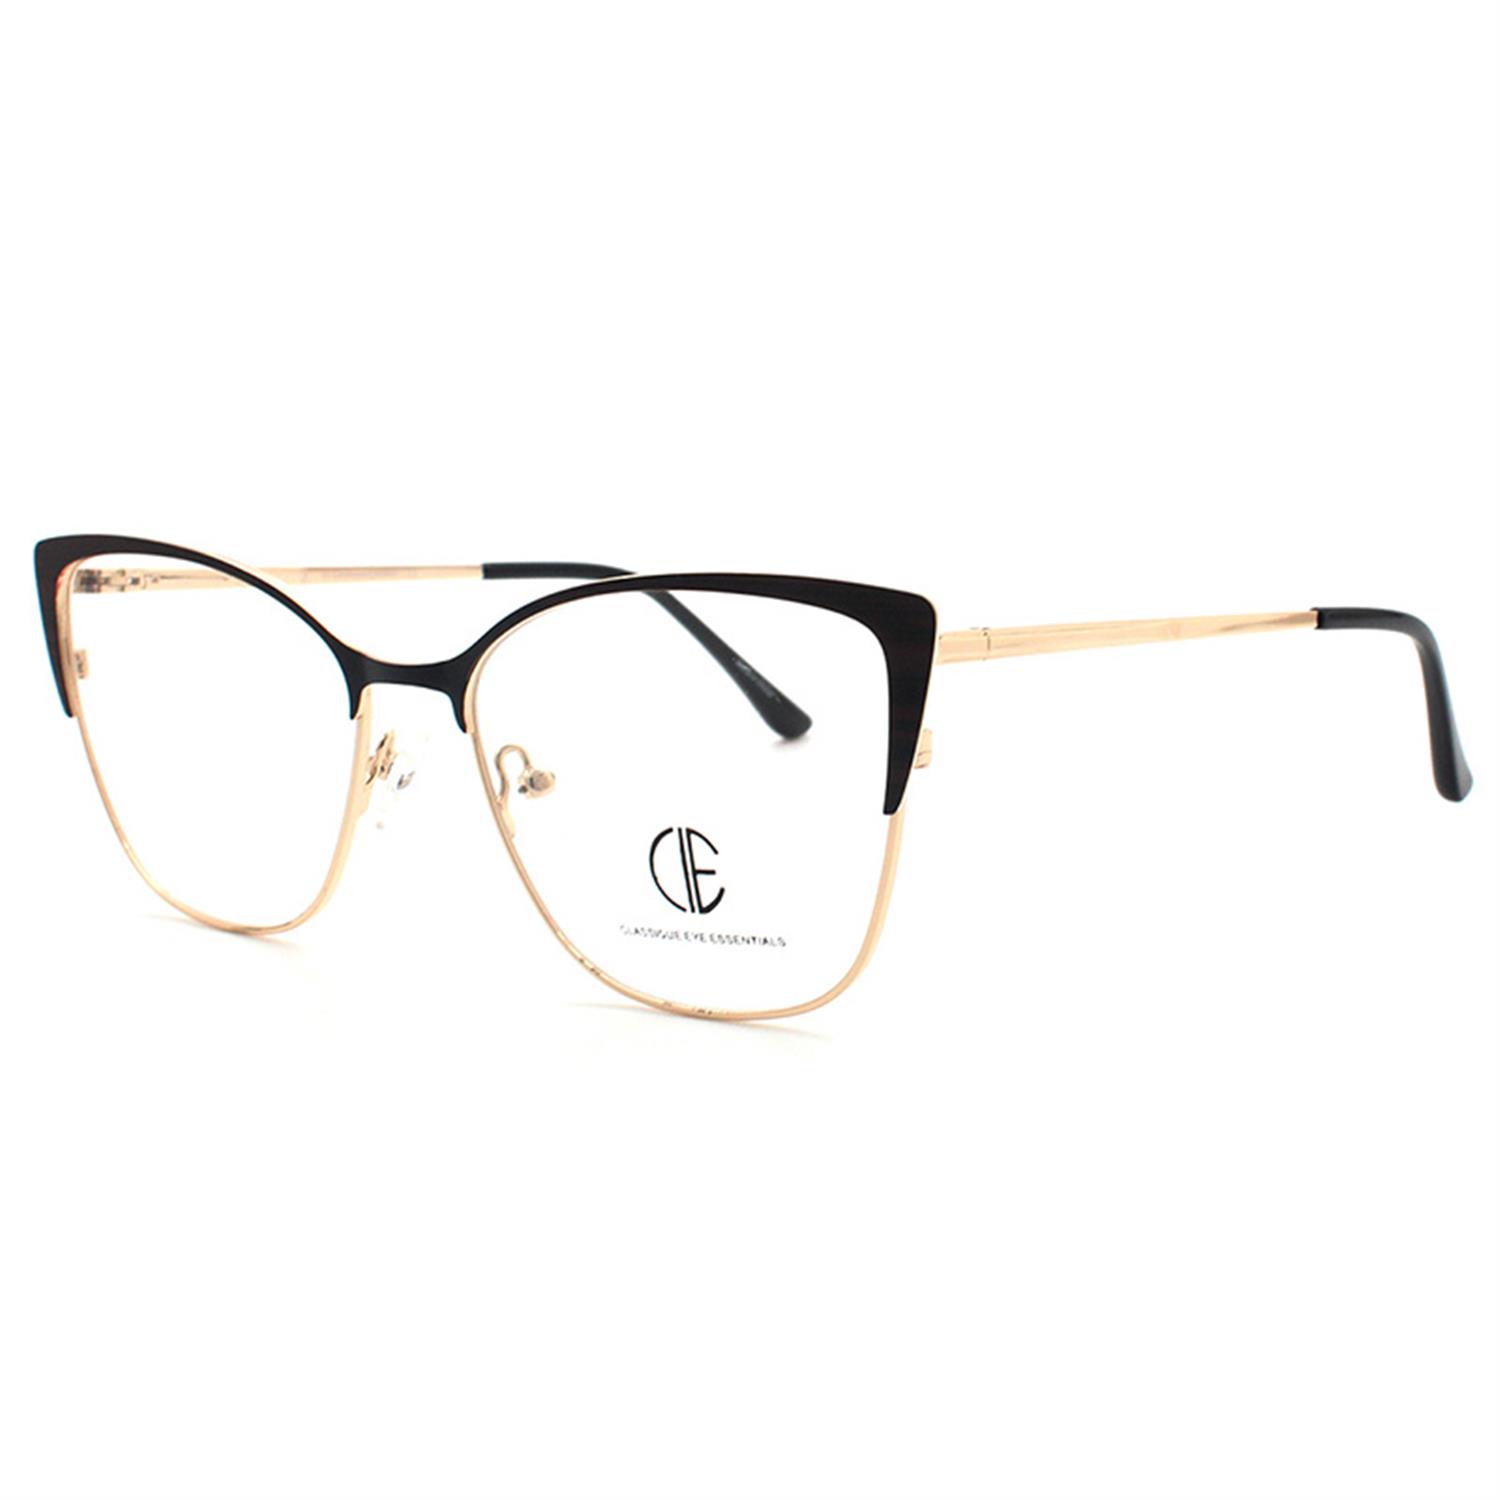 Picture of Cie Eyeglasses CIE176